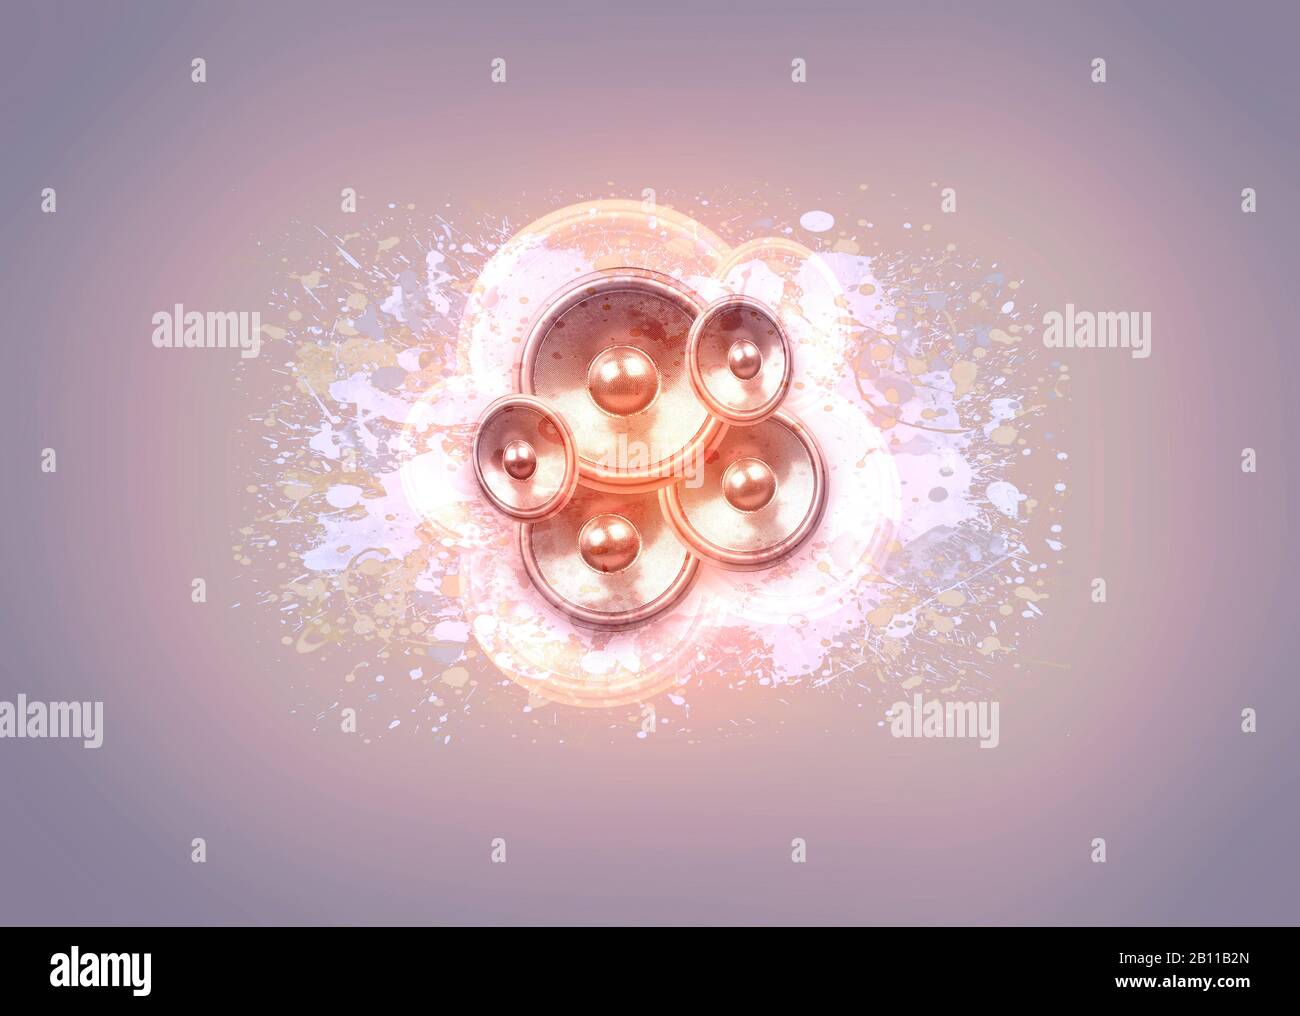 Audio speakers and paint splashes on a glowing background with vignette Stock Photo